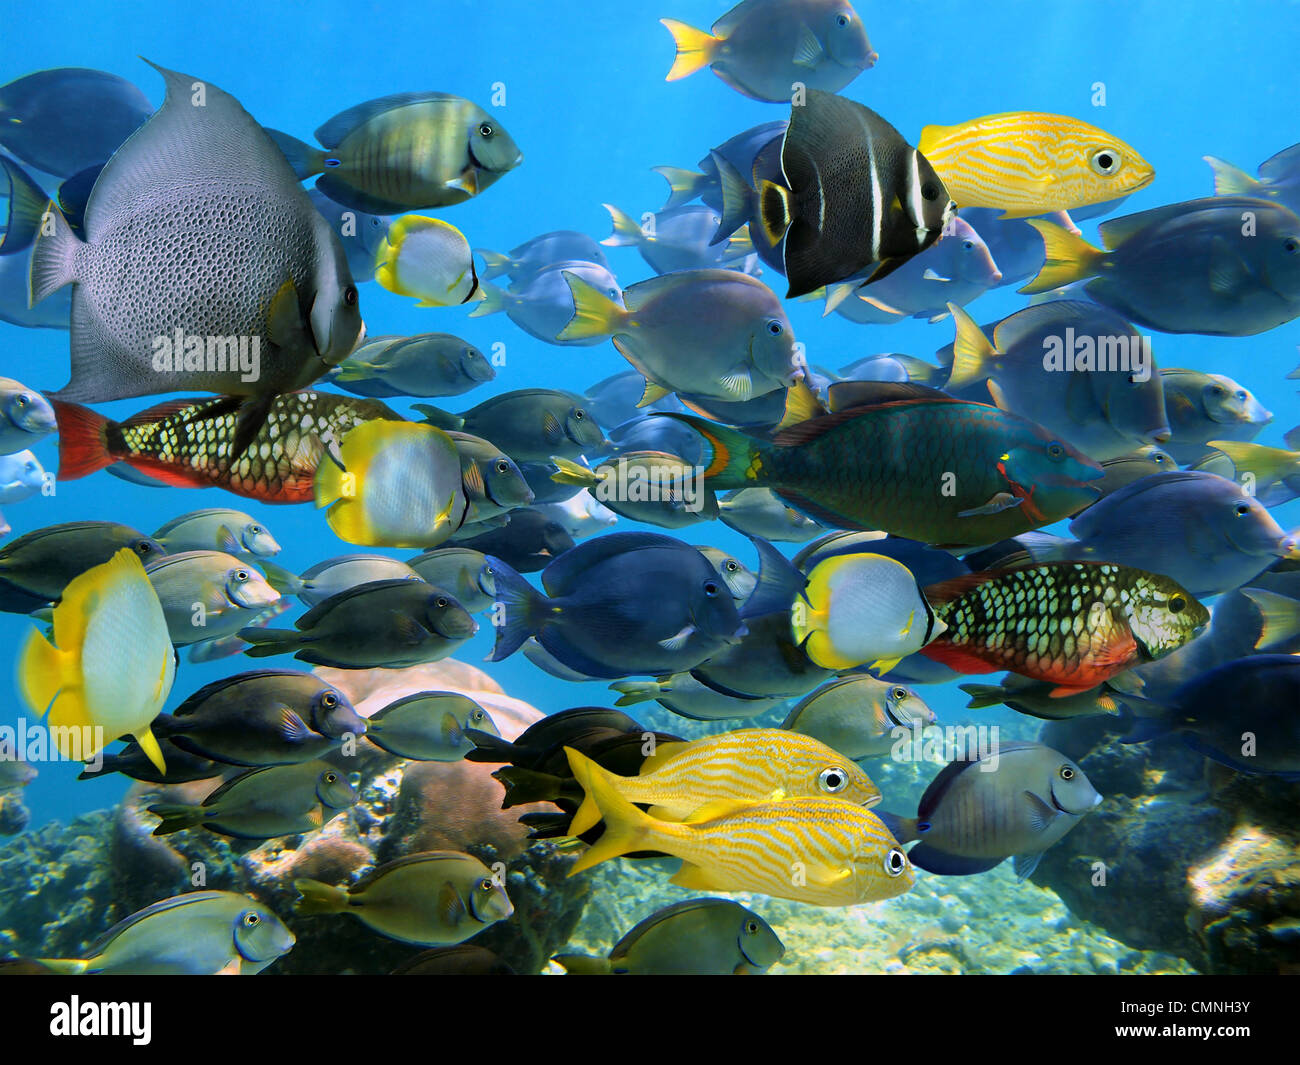 Colorful tropical fish school underwater in the Caribbean sea, Mexico Stock Photo